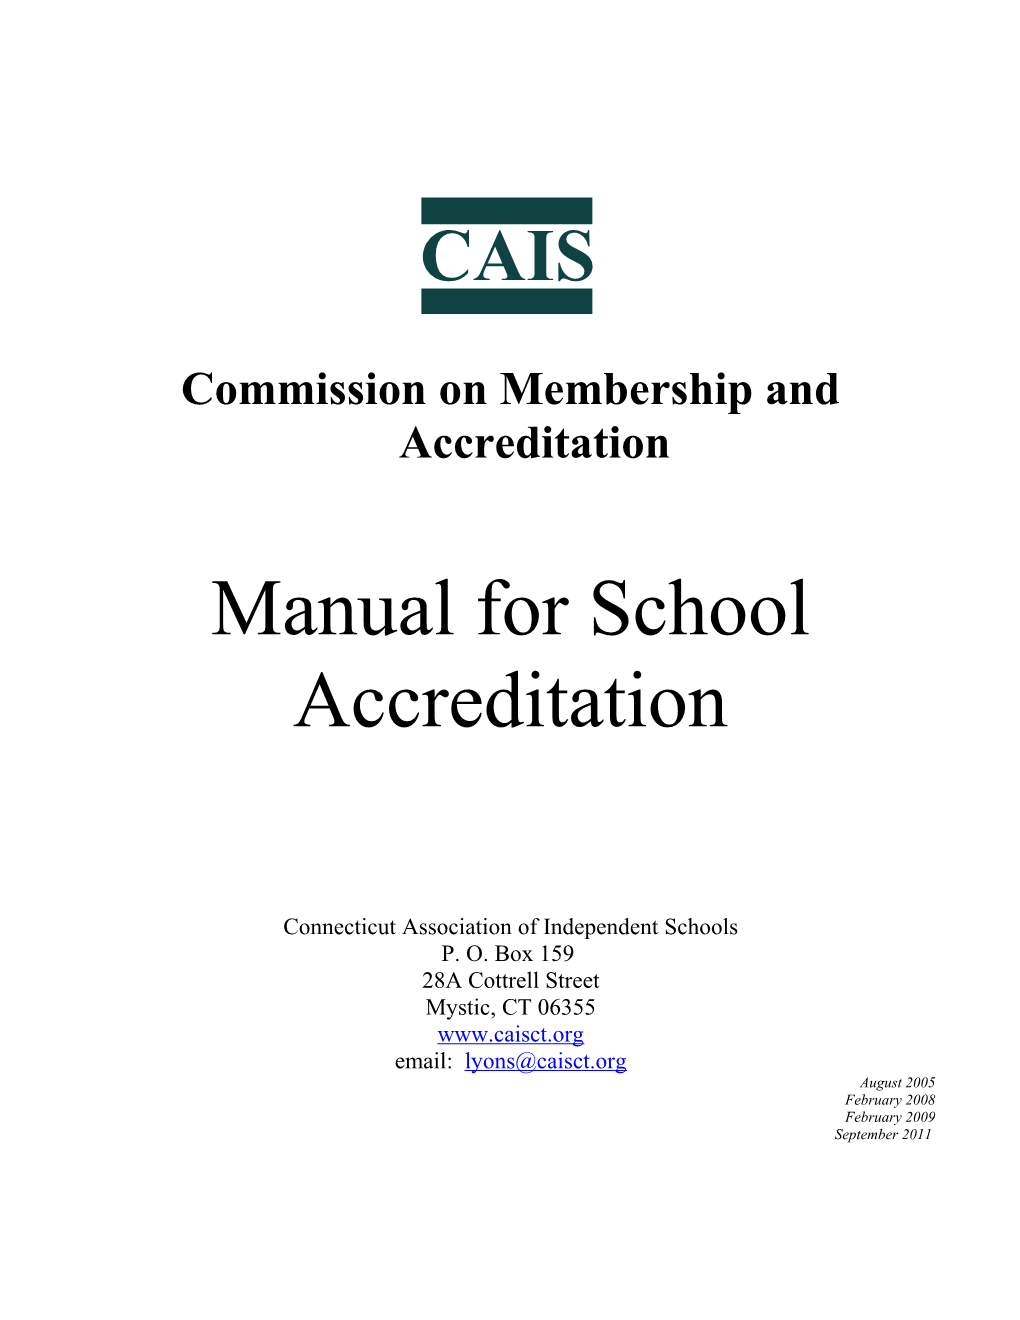 Commission on Membership and Accreditation